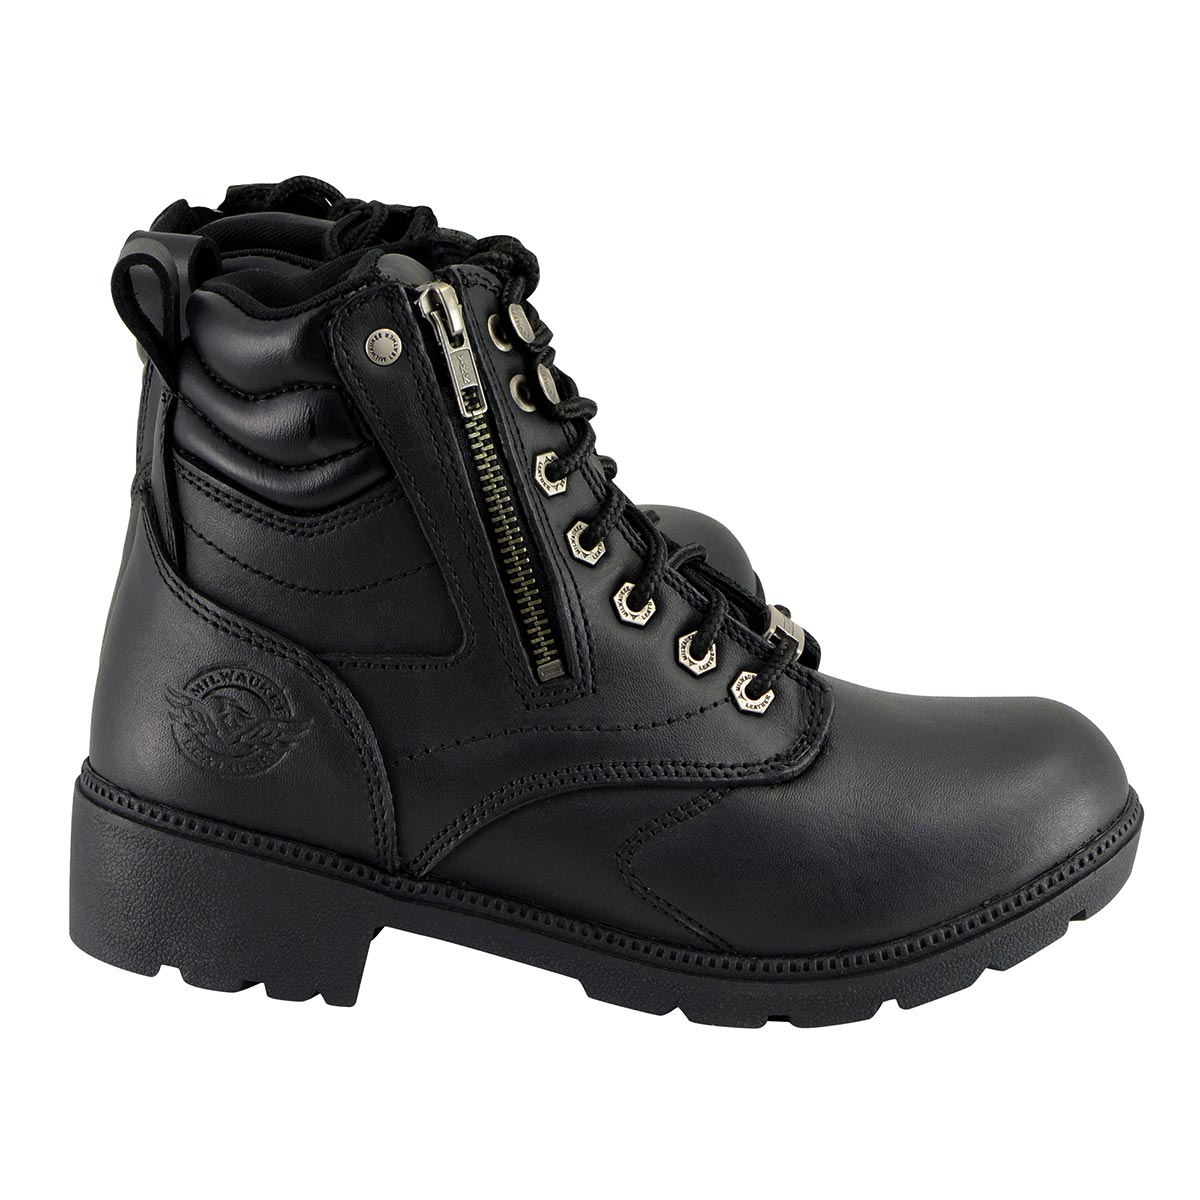 Milwaukee Leather MBL9320W Women's Black Premium Leather 'Wide-Width' Lace-Up Motorcycle Rider Boots